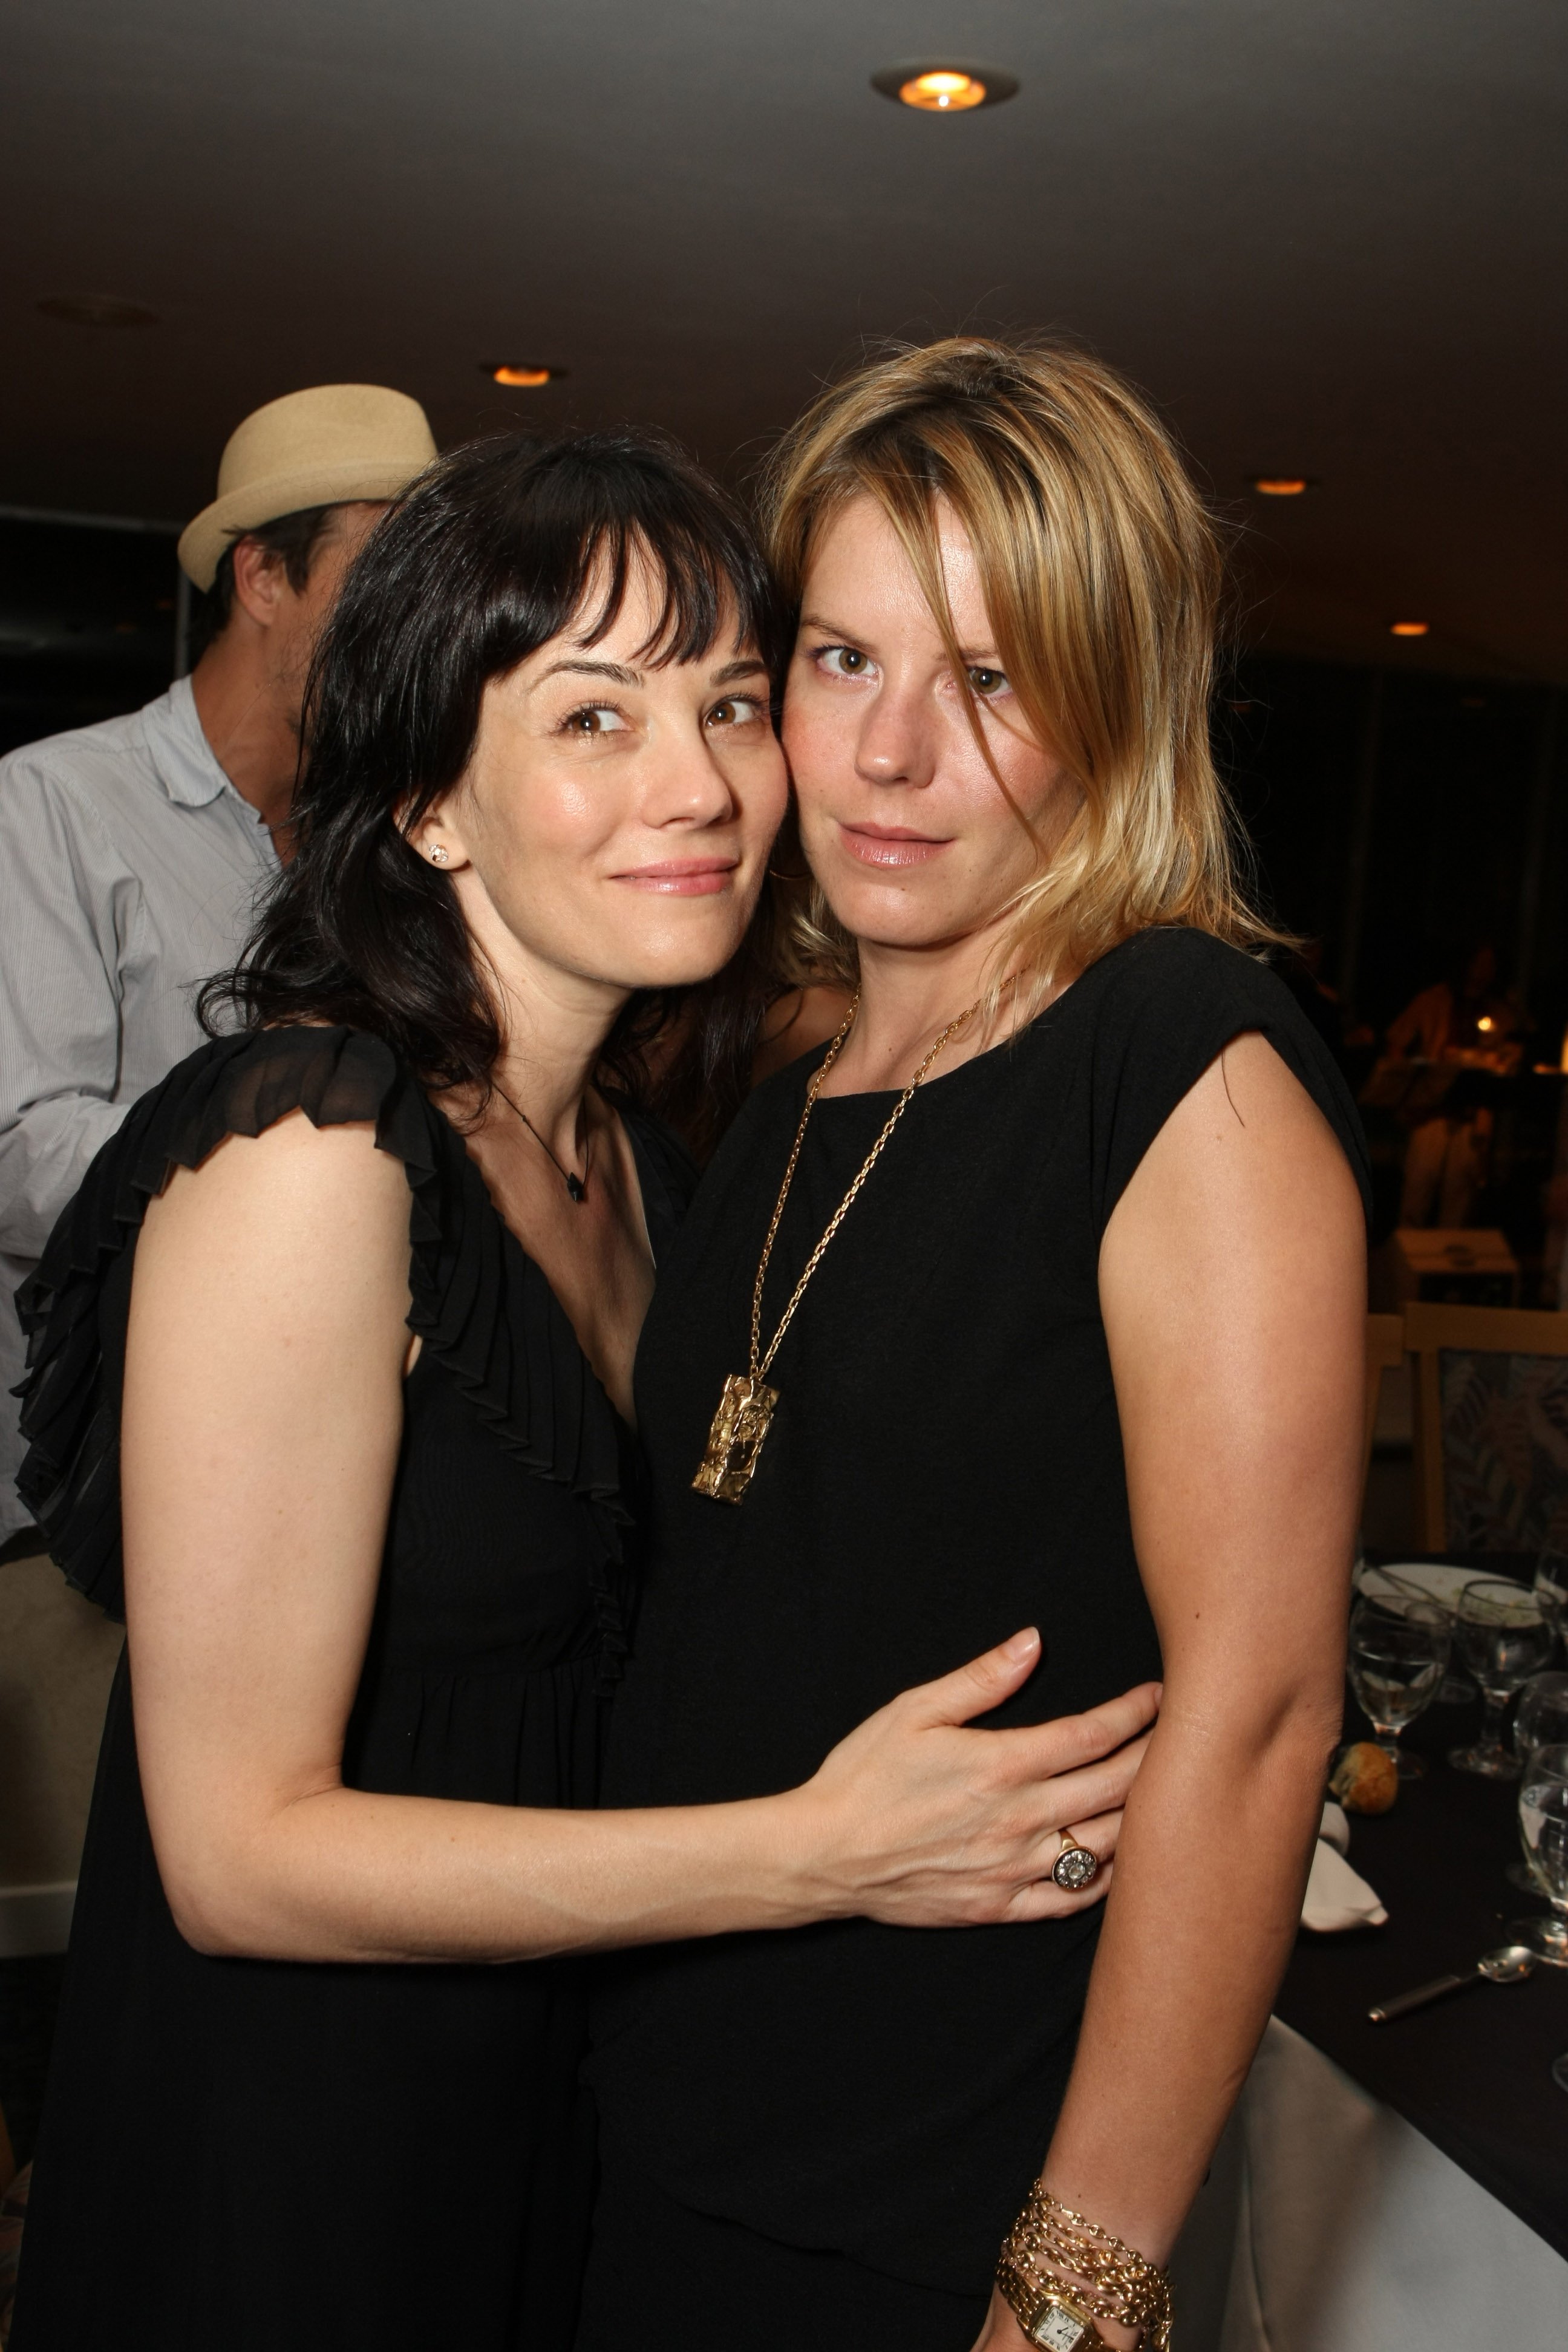 Natasha Gregson Wagner and Courtney Brooke Wagner at Donovan Leitch's 40th Birthday Party at The Muholland Tennis Club on August 16, 2007 in Los Angeles, California ┃Source: Getty Images